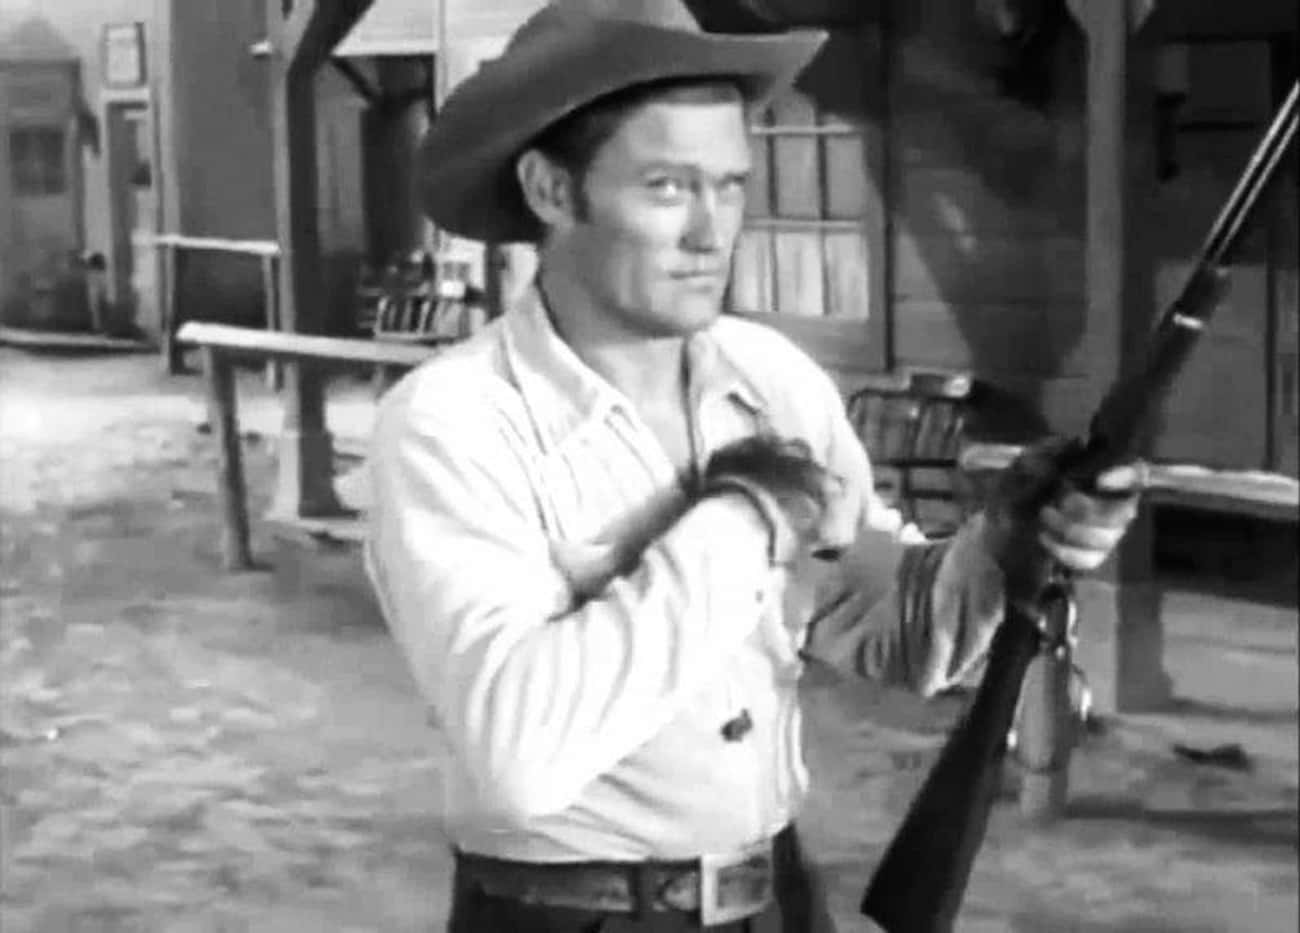 ‘Rifleman’ Chuck Connors Was A Former Baseball Pro And Hit Balls On Set With His Child Co-Star